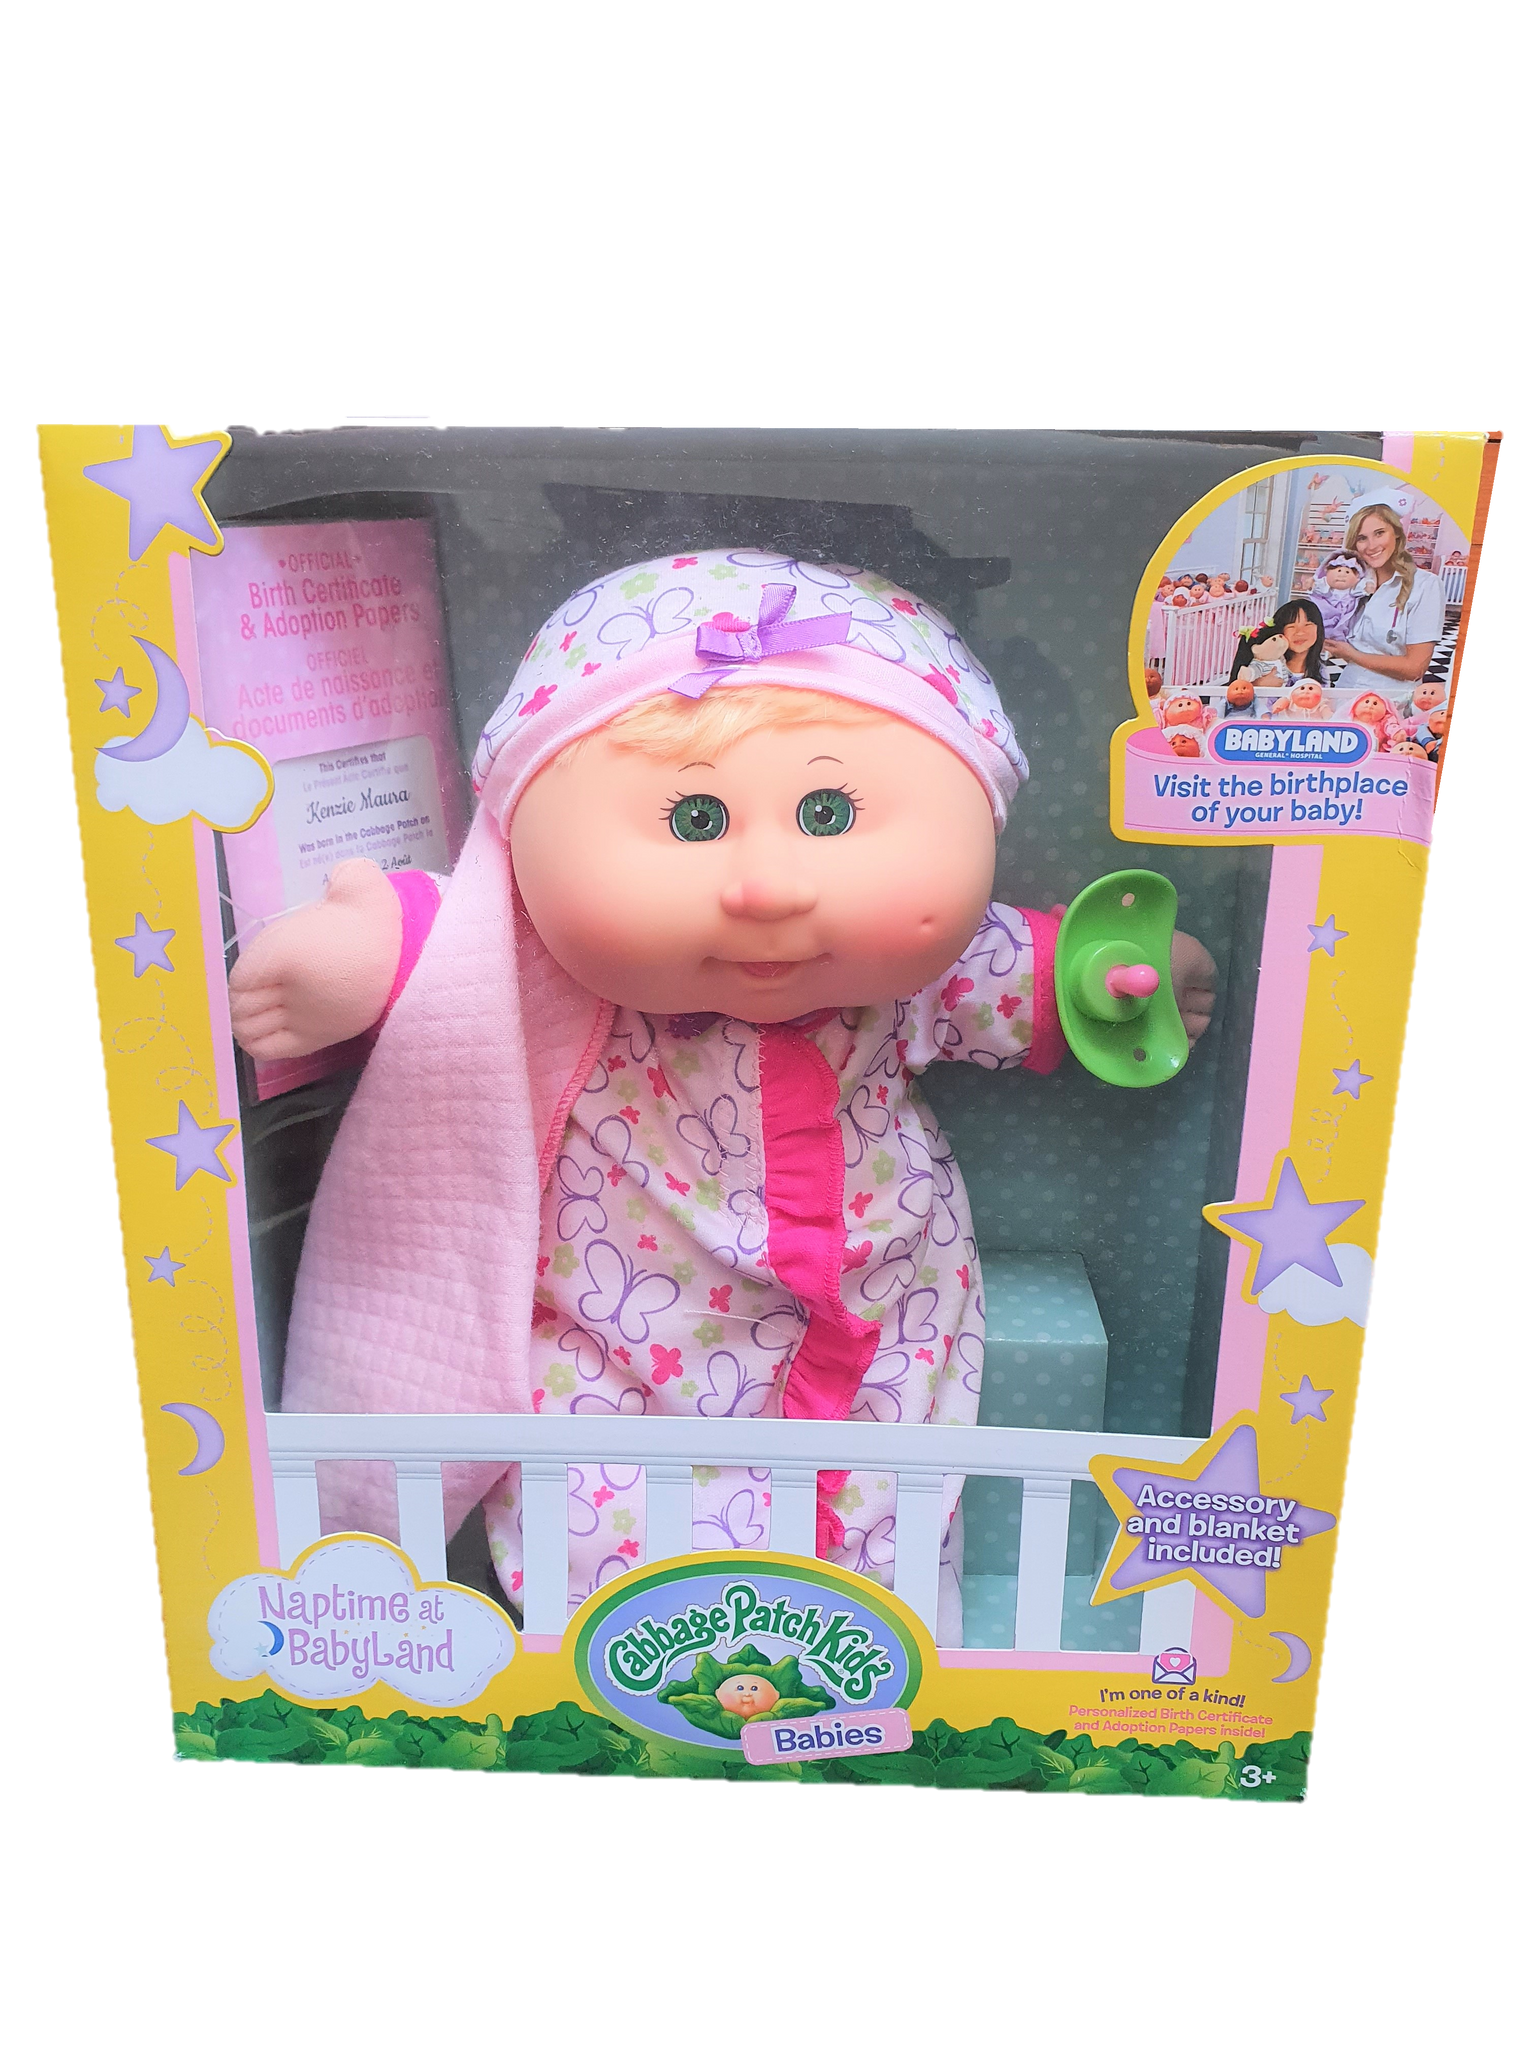 make your own cabbage patch birth certificate